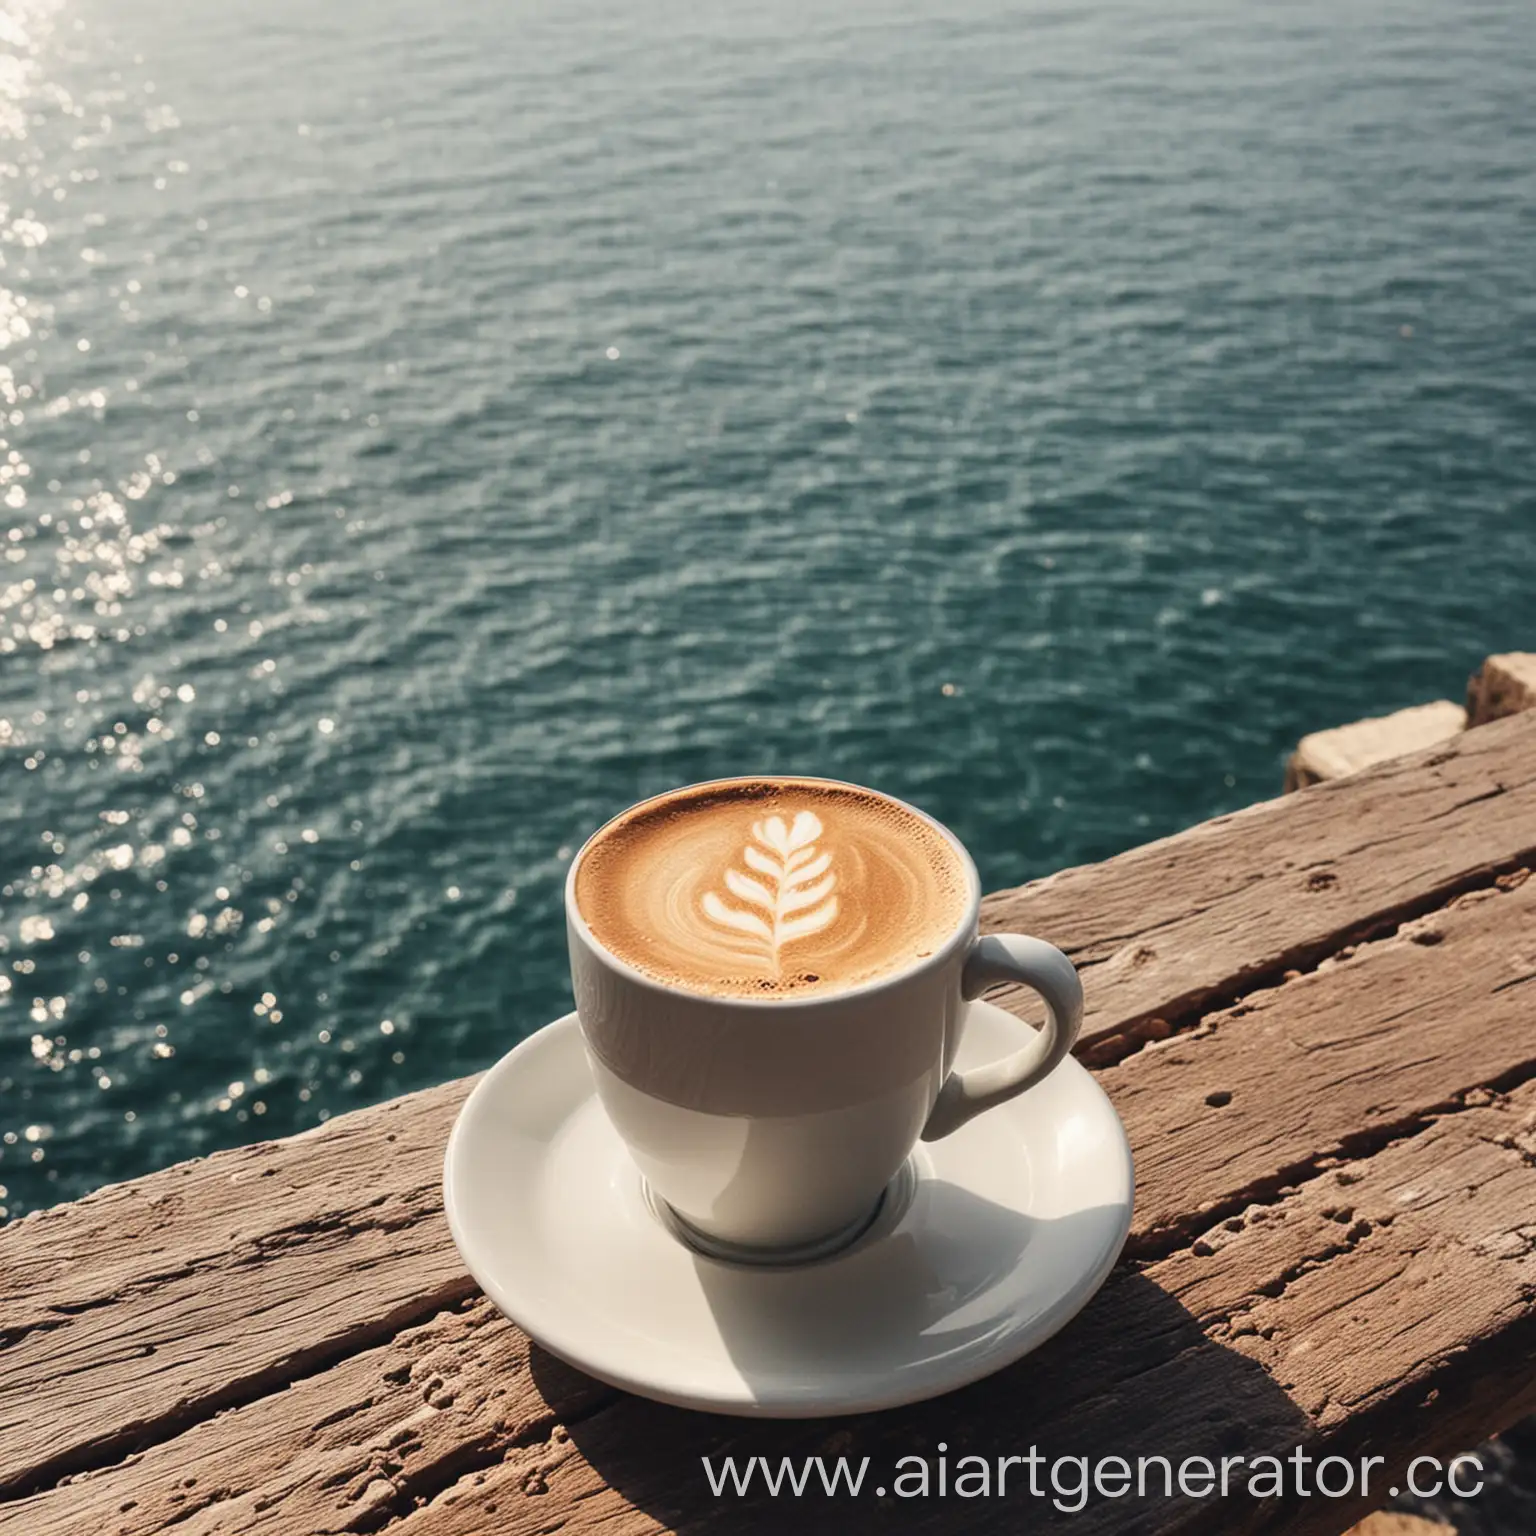 Sipping-Coffee-by-the-Tranquil-Seaside-A-Refreshing-Summer-Escape